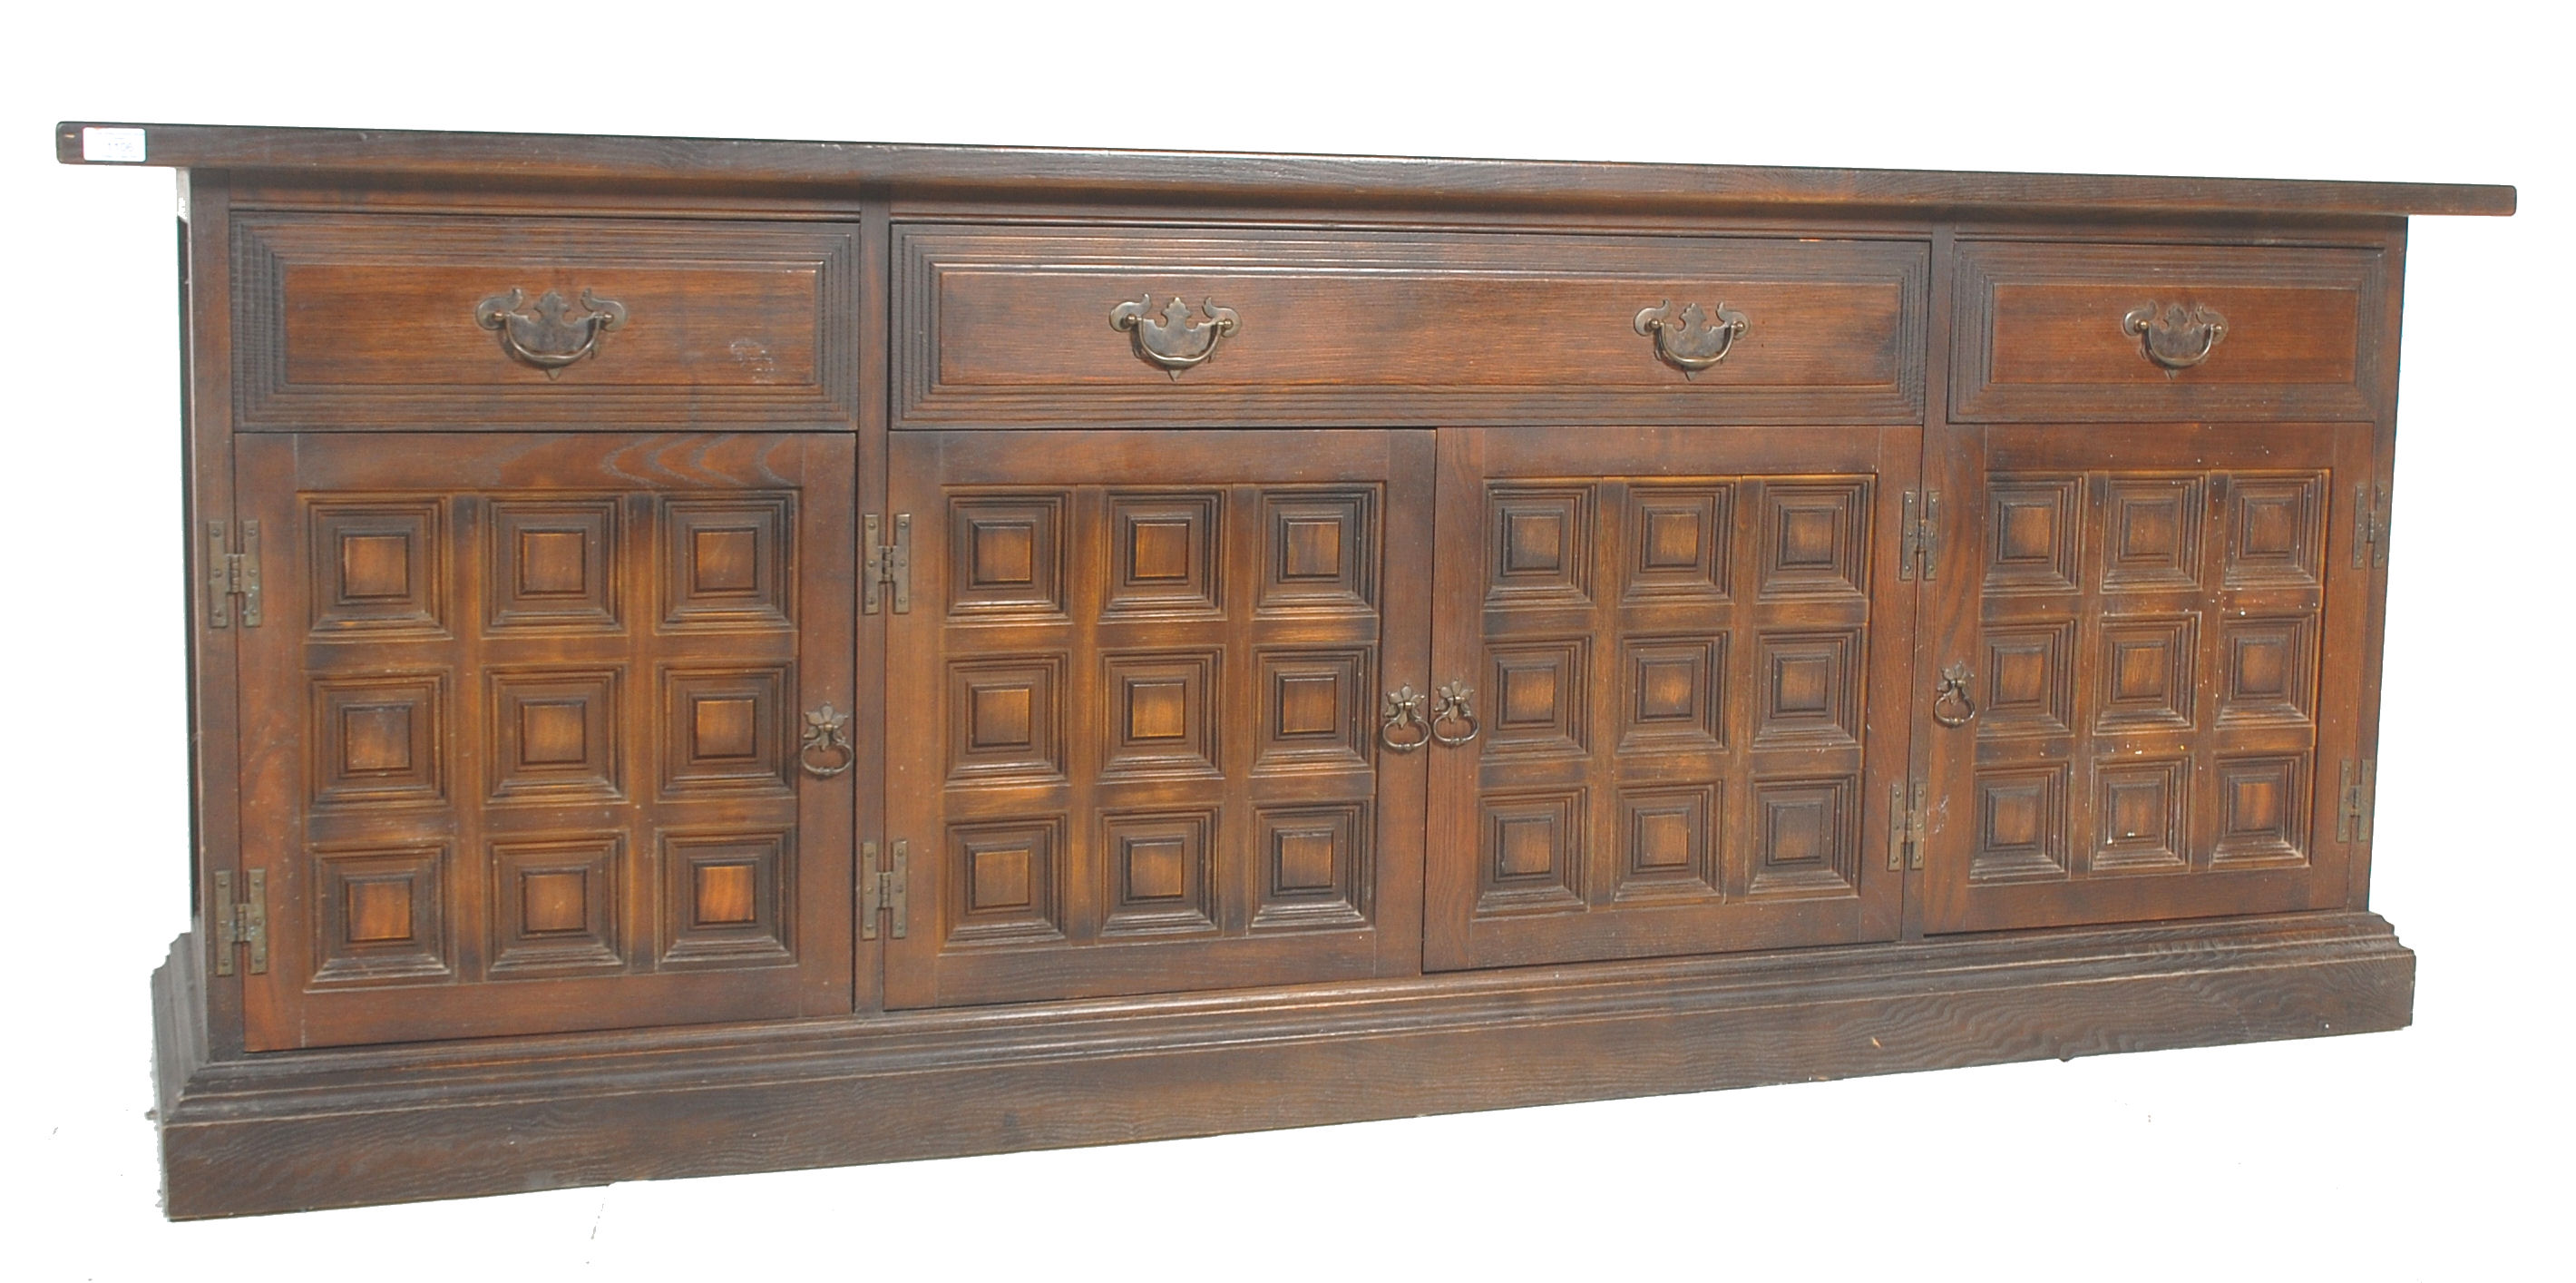 A mid century Spanish influence large carved oak sideboard / dresser base with portcullis relief